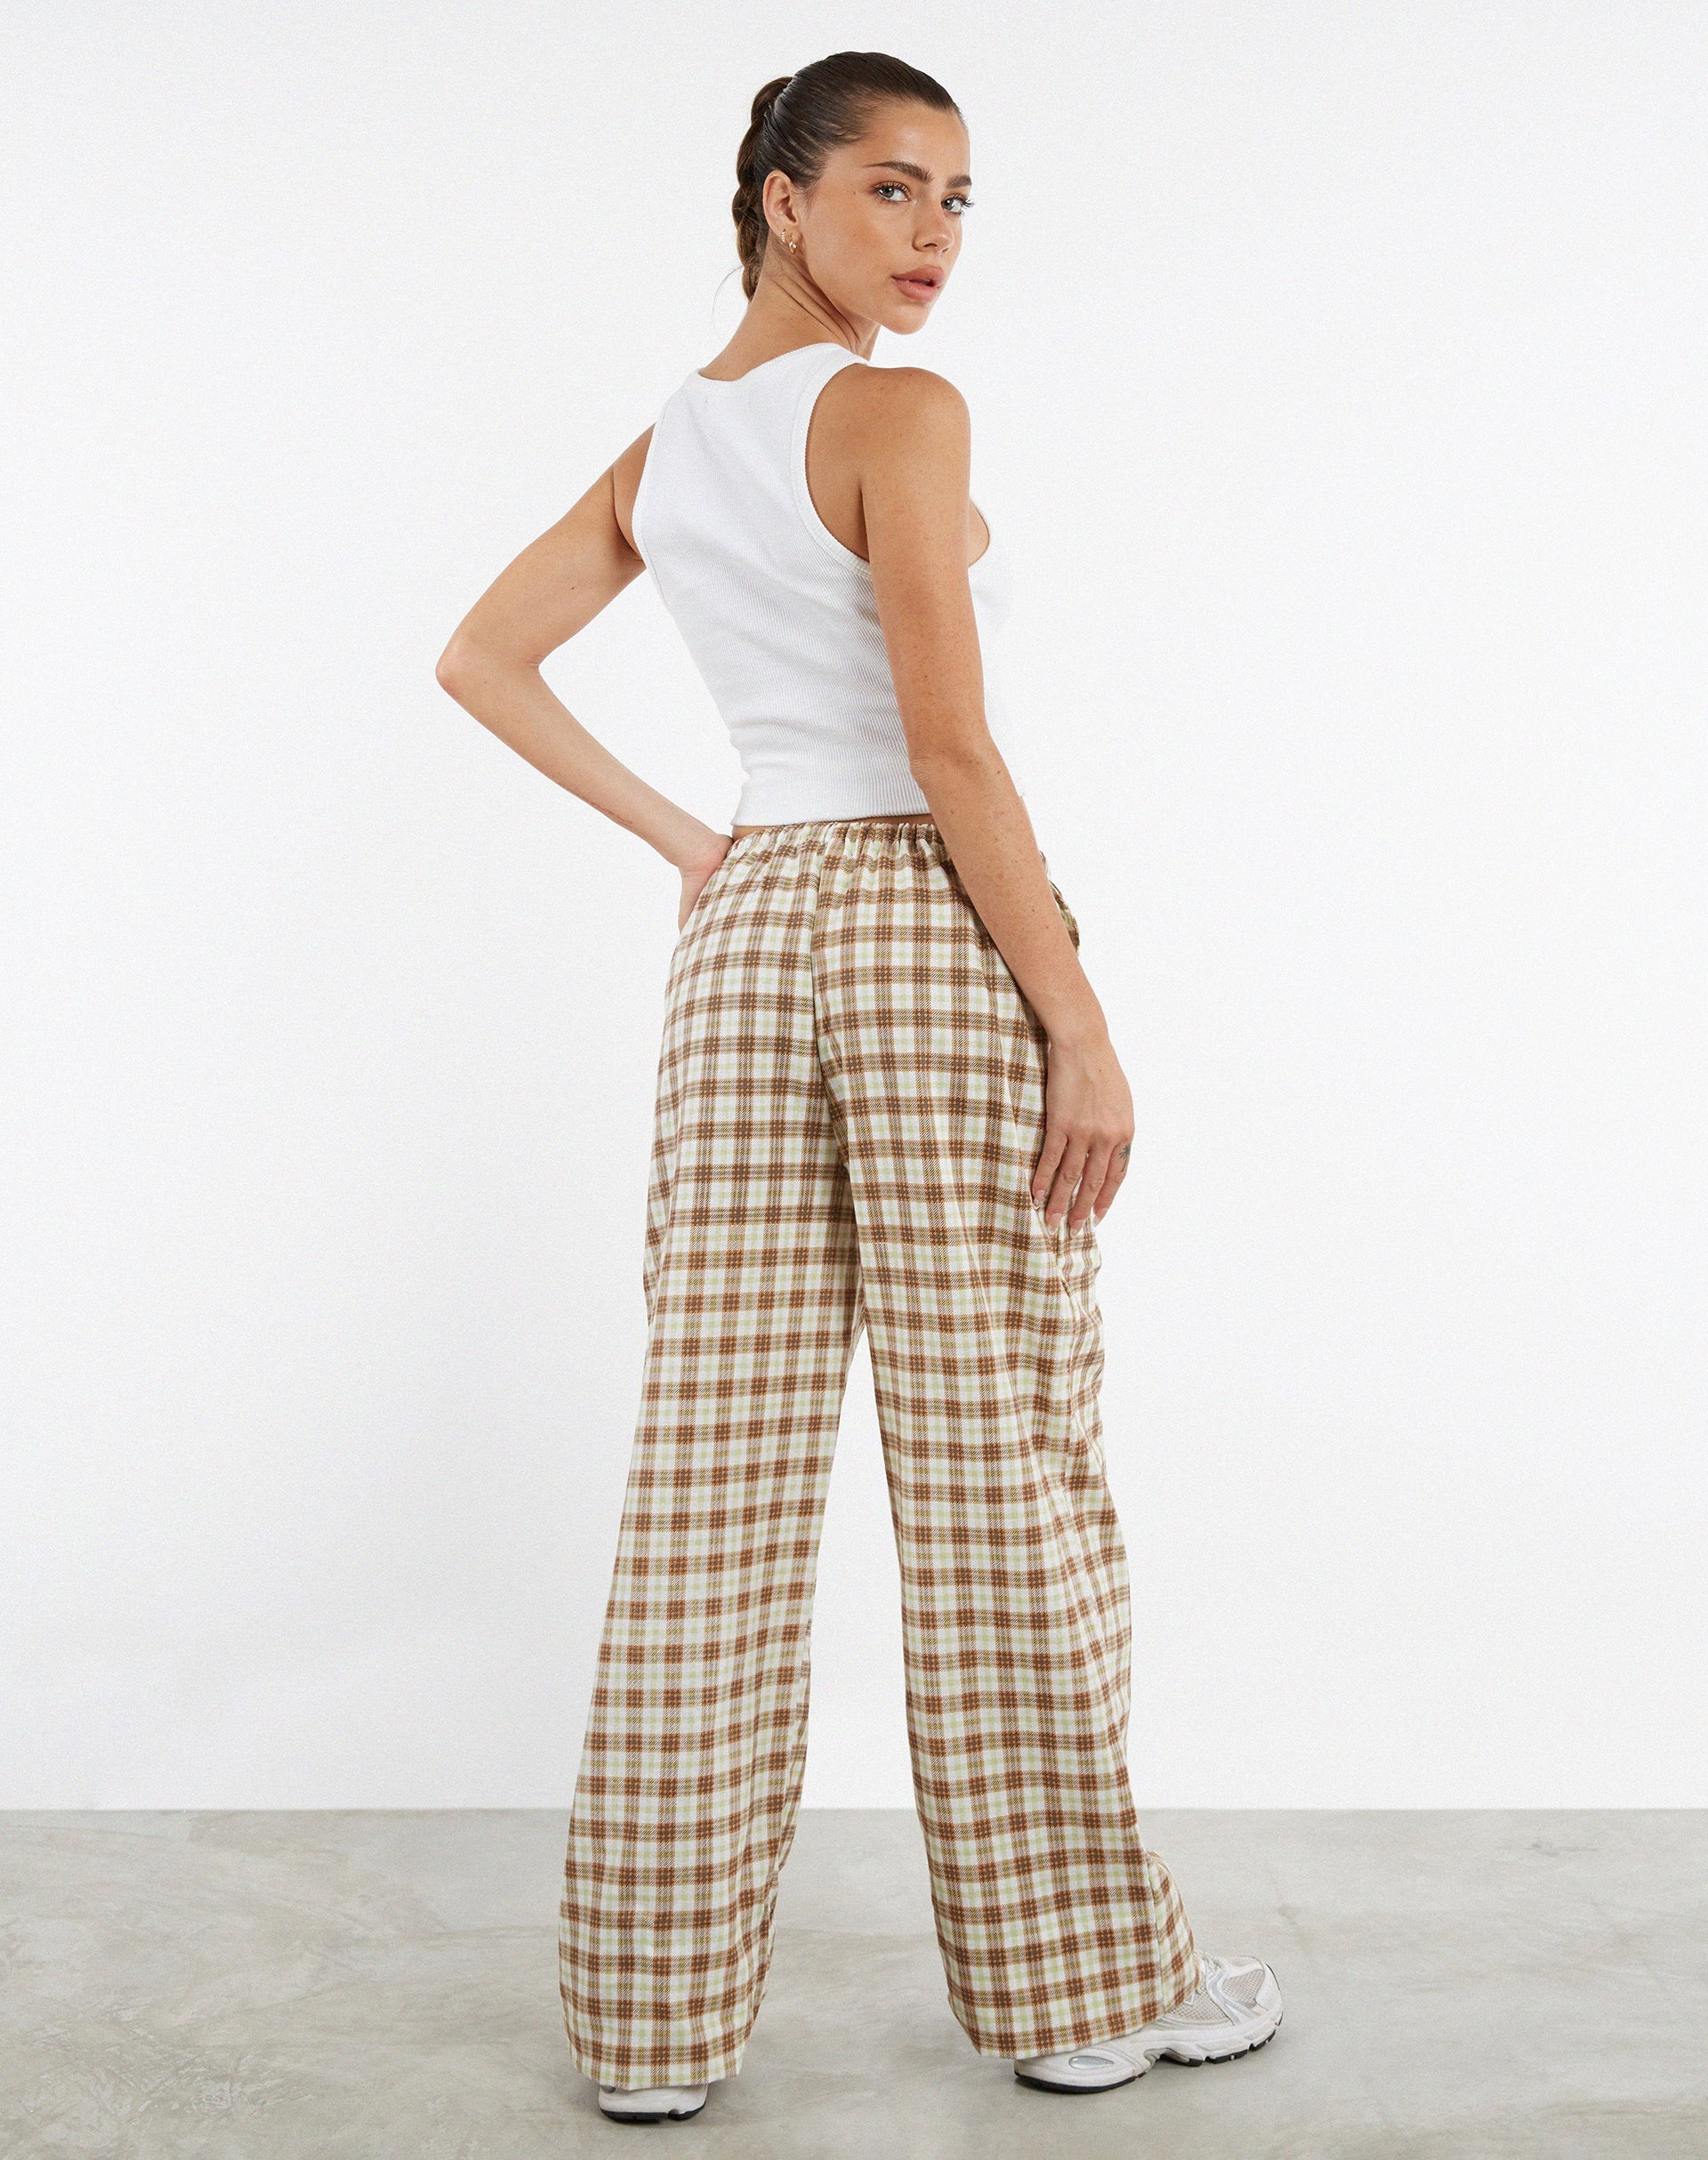 image of MOTEL X JACQUIE Lirura Wide Leg Trouser in Yellow and Brown Check